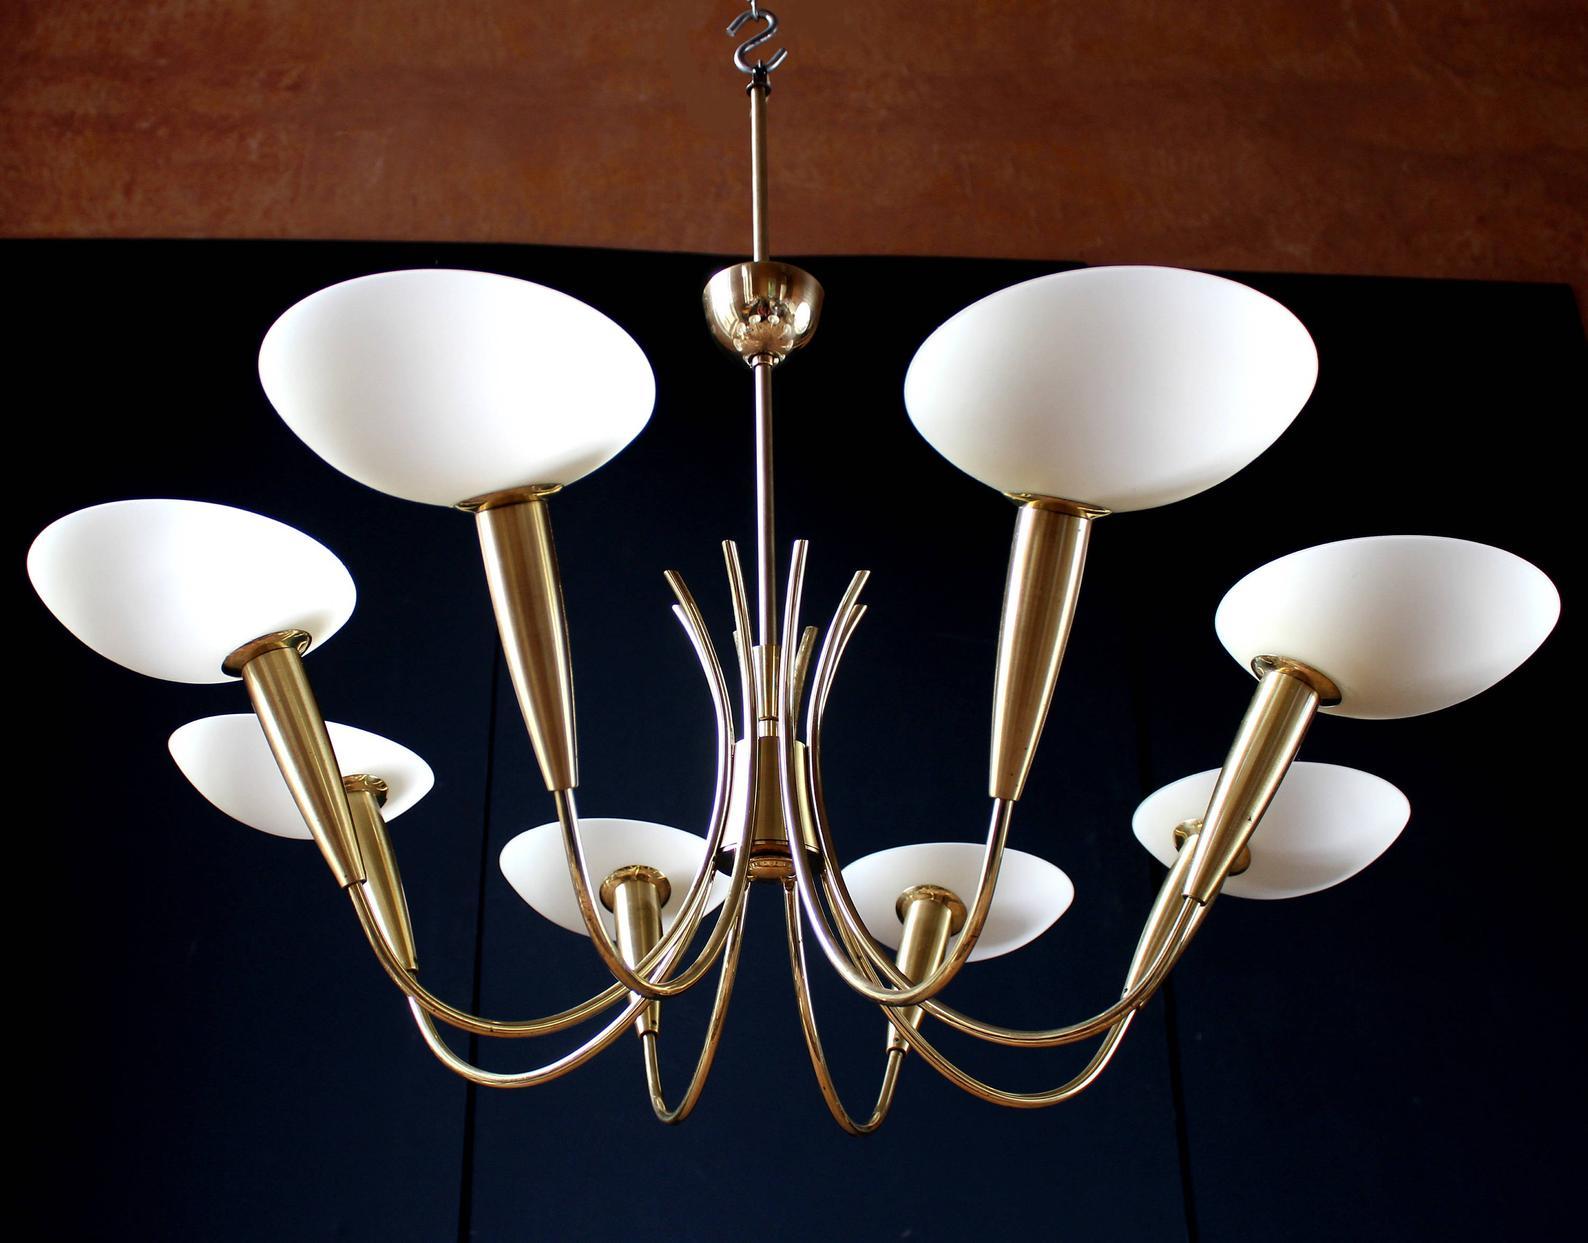 Spider chandelier with 8-light (E14)
Brass and opal glass shades 

The diameter is 32